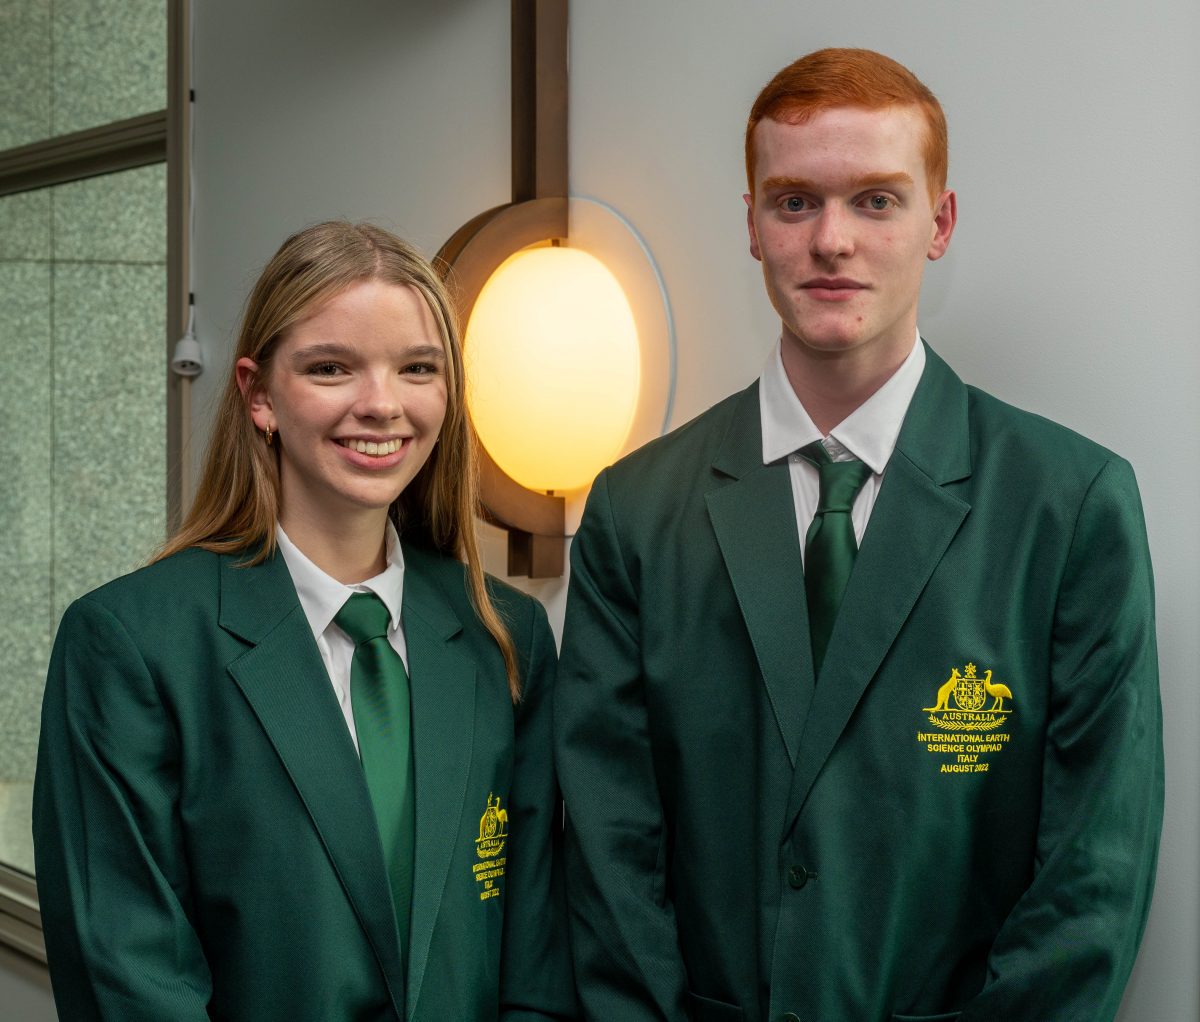 Female and male students wearing blazers